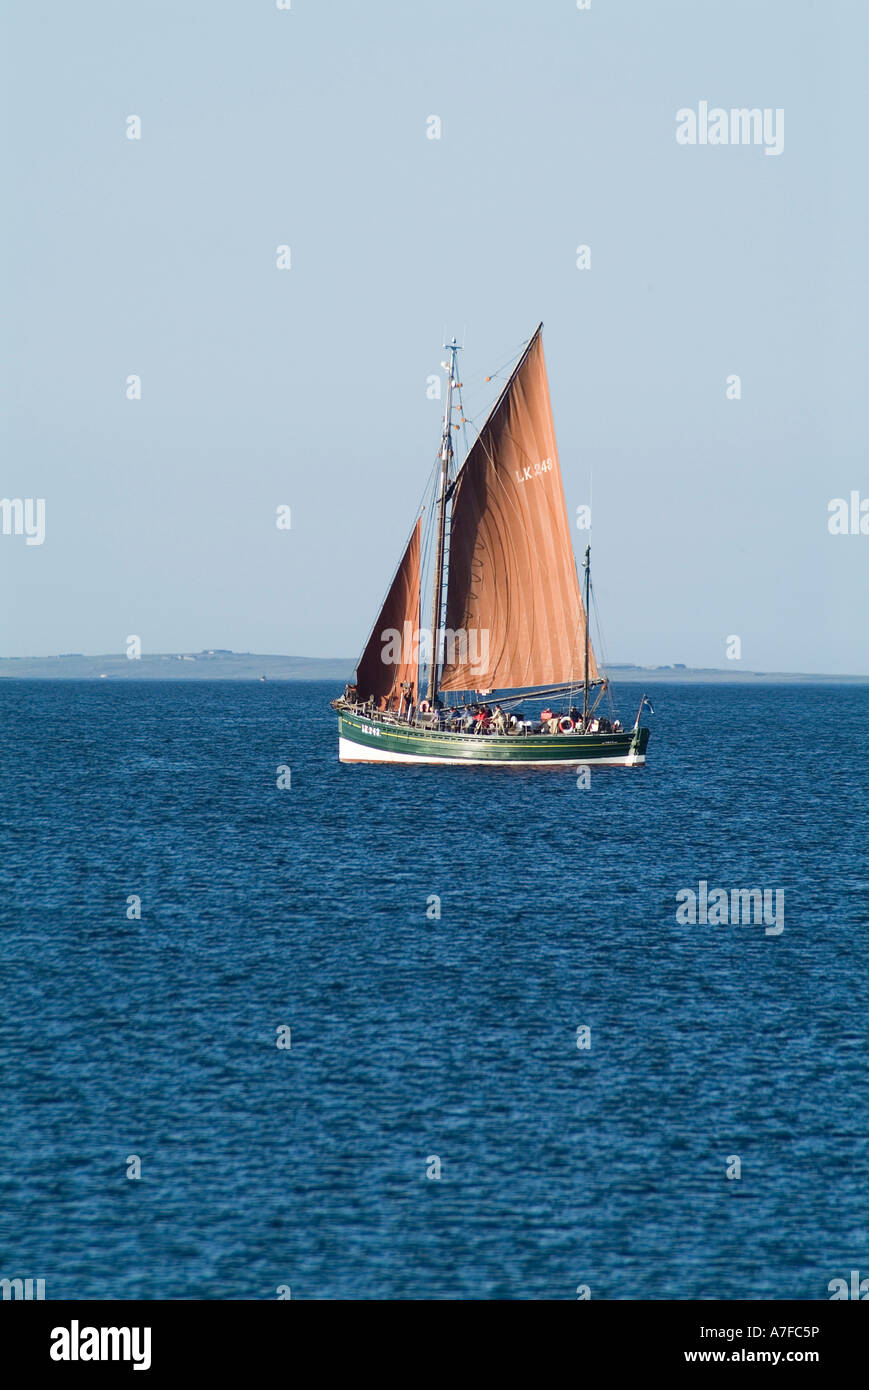 dh The Swan KIRKWALL ORKNEY Fifie type herring drifter two masted lugger sailing in Kirkwall Bay Stock Photo